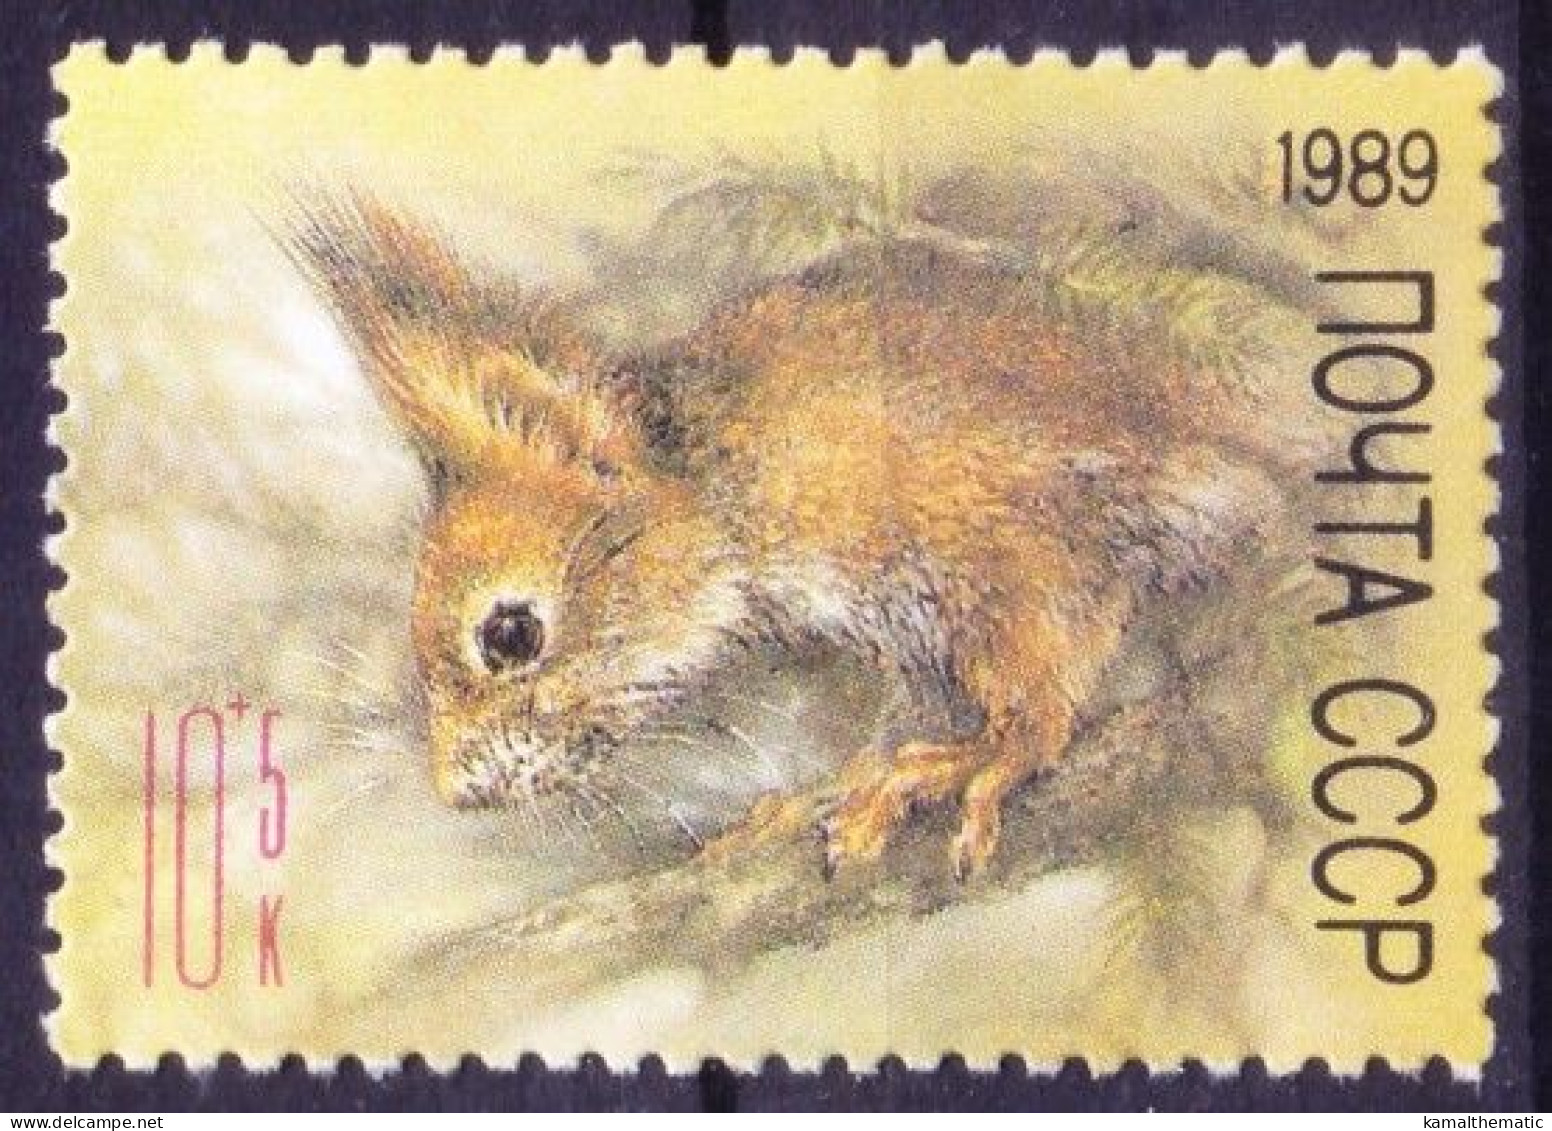 Soviet Union 1989 Mint No Gum, Eurasian Red Squirrel, Zoo Relief Fund, Rodents - Rodents